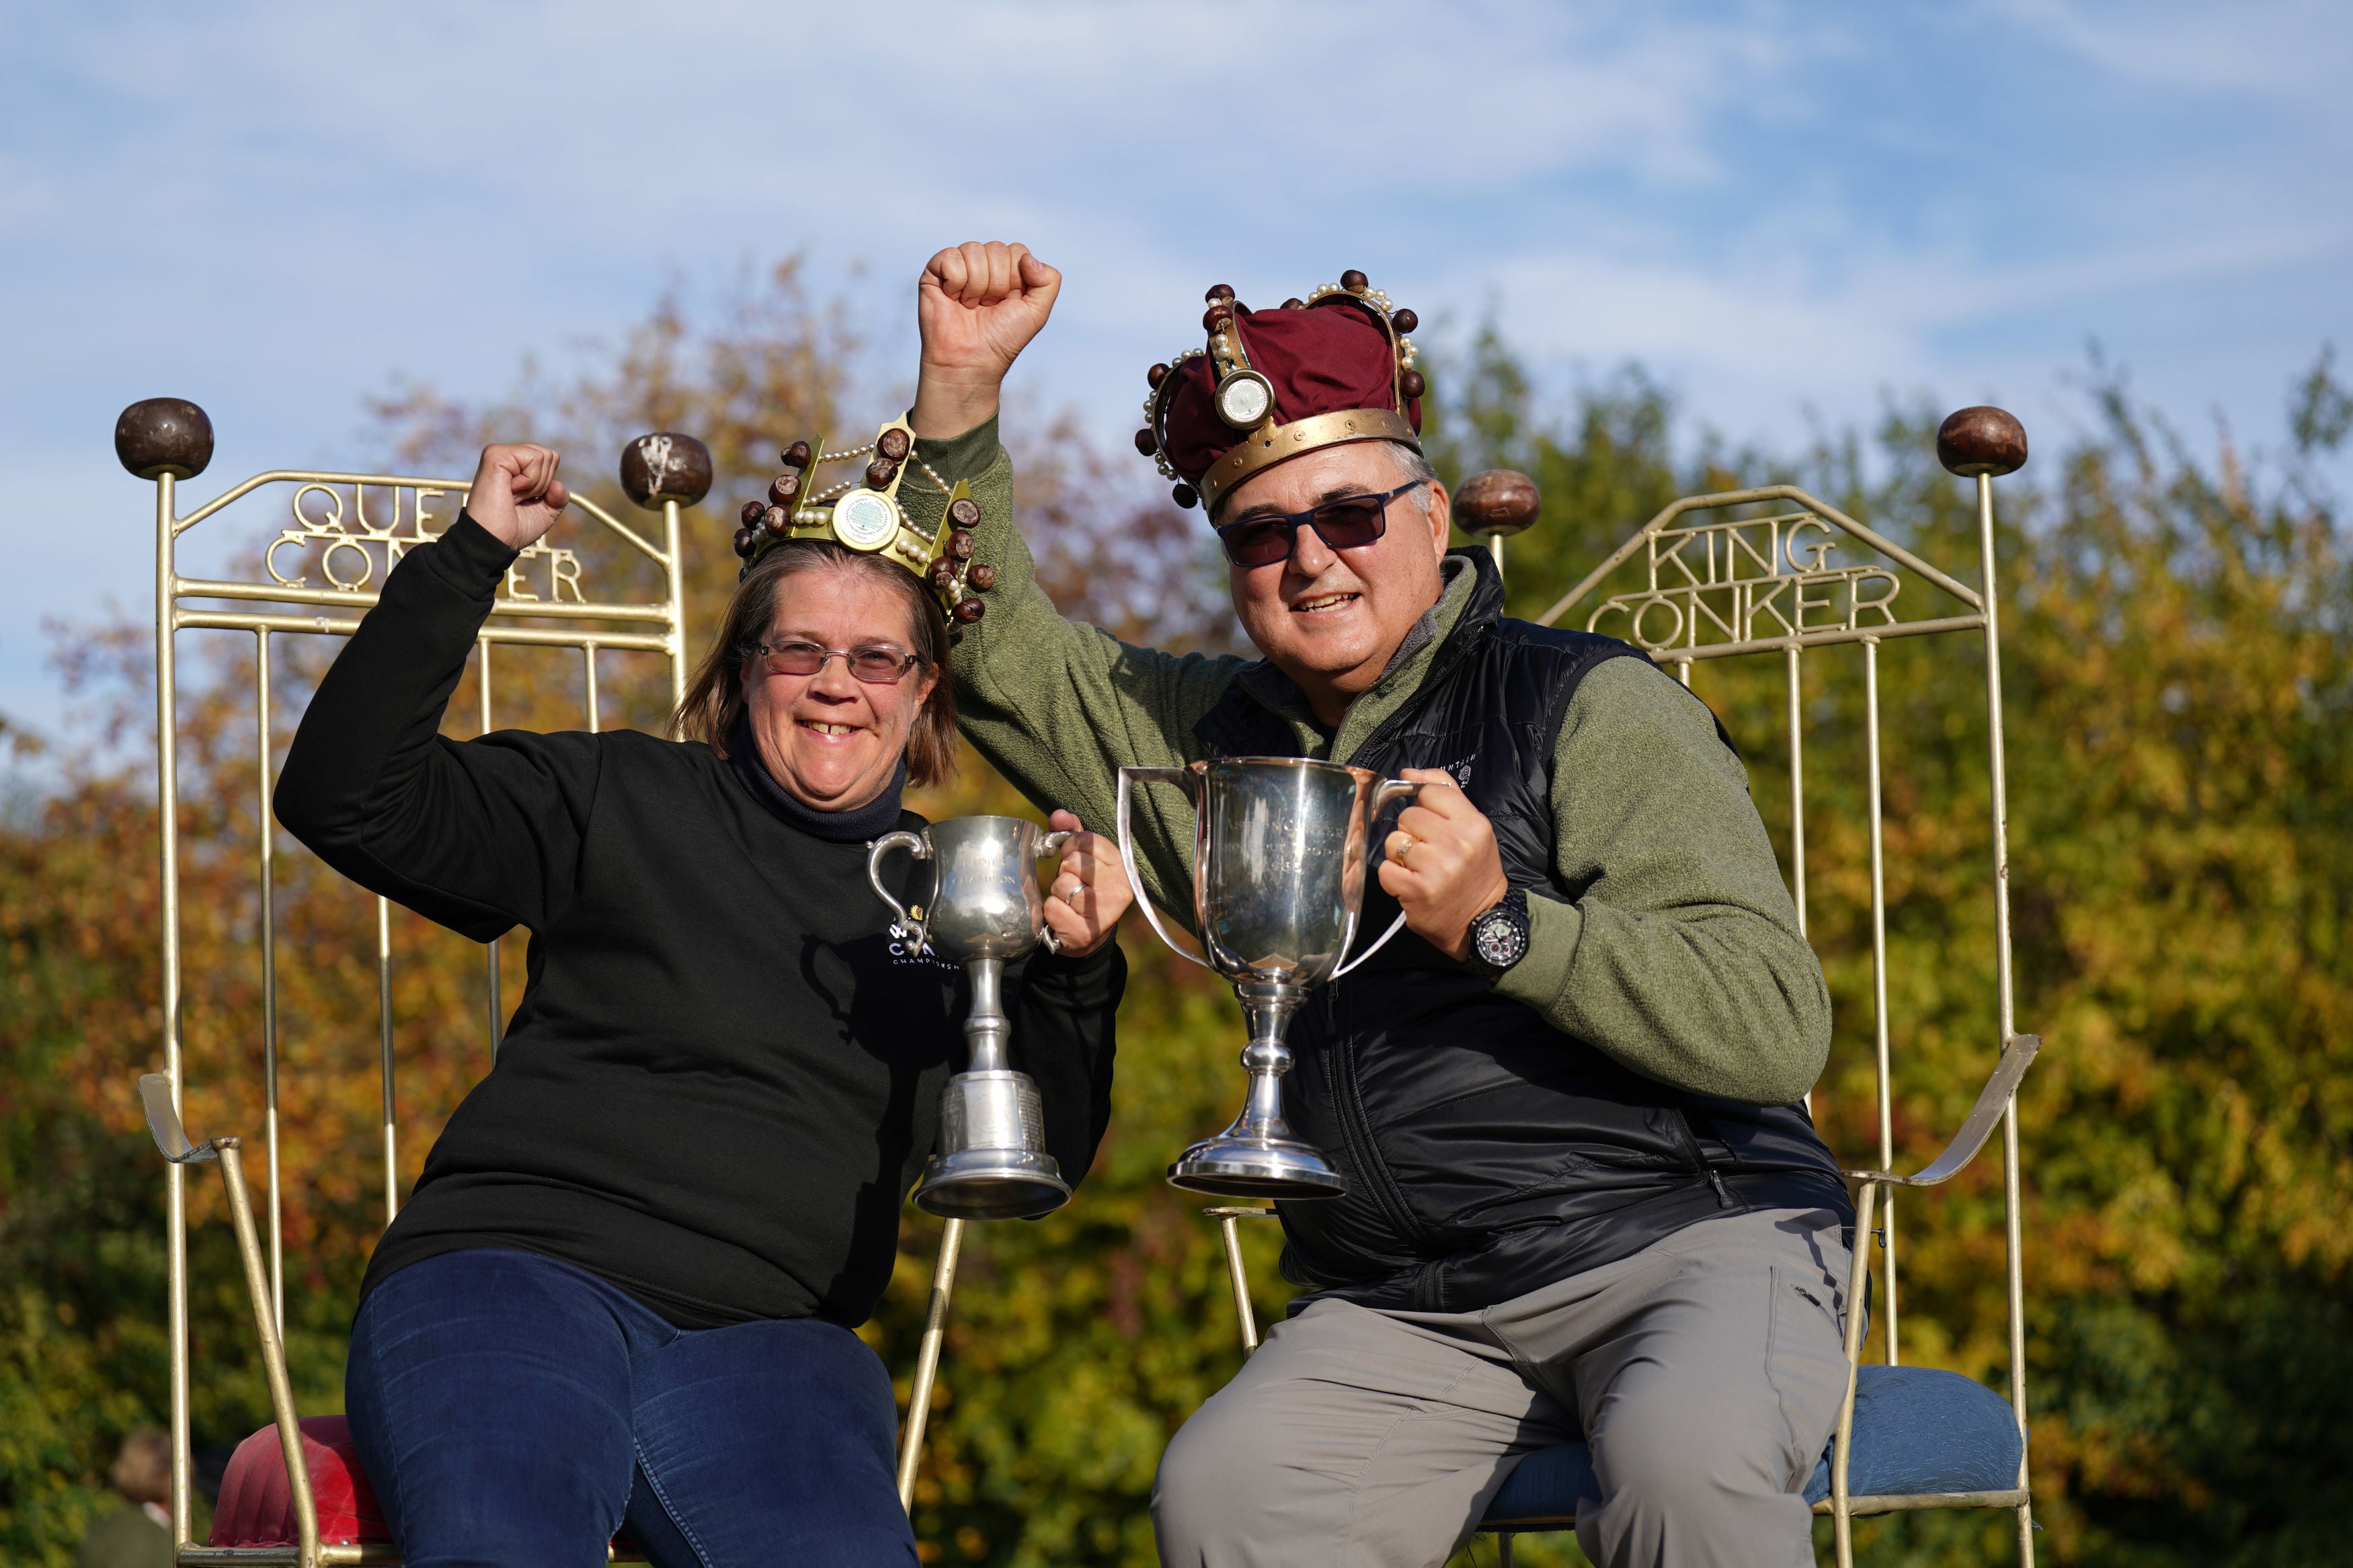 Fee Aylmore (left) won the women’s World Conker Championship in Northamptonshire on Sunday